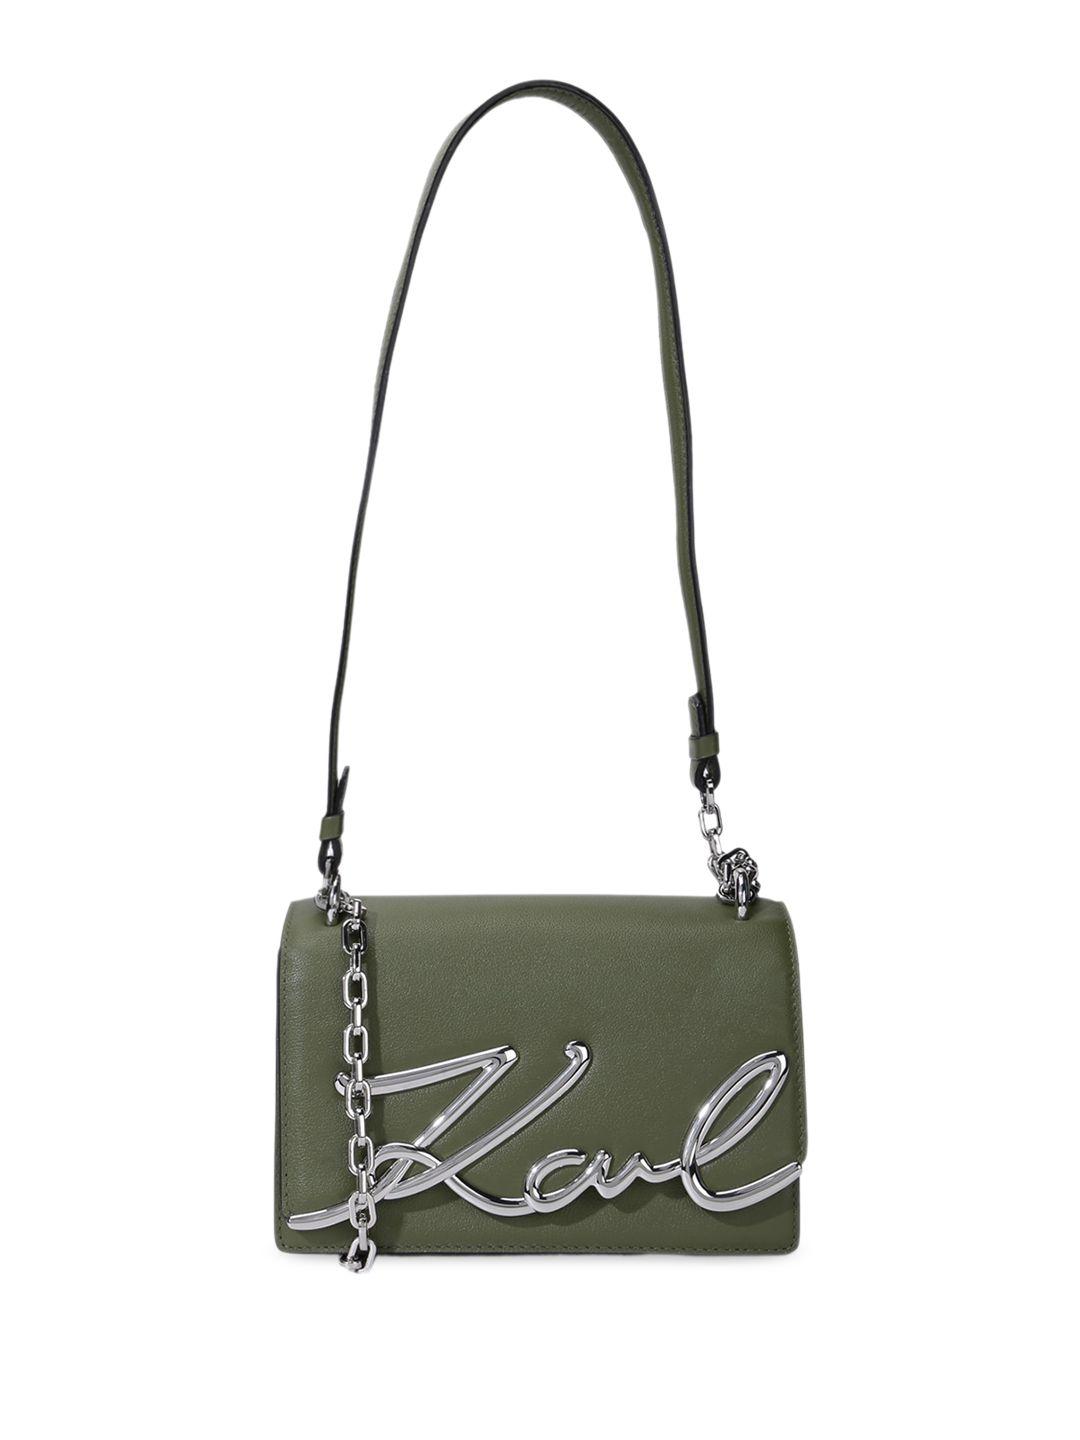 karl lagerfeld textured leather structured sling bag